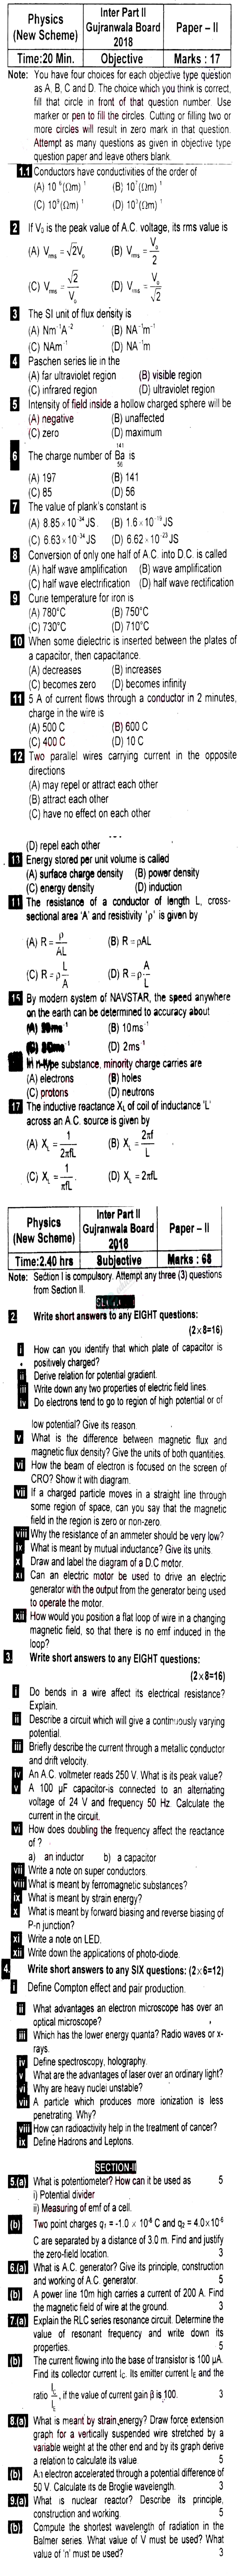 Physics 12th class Past Paper Group 2 BISE Gujranwala 2018